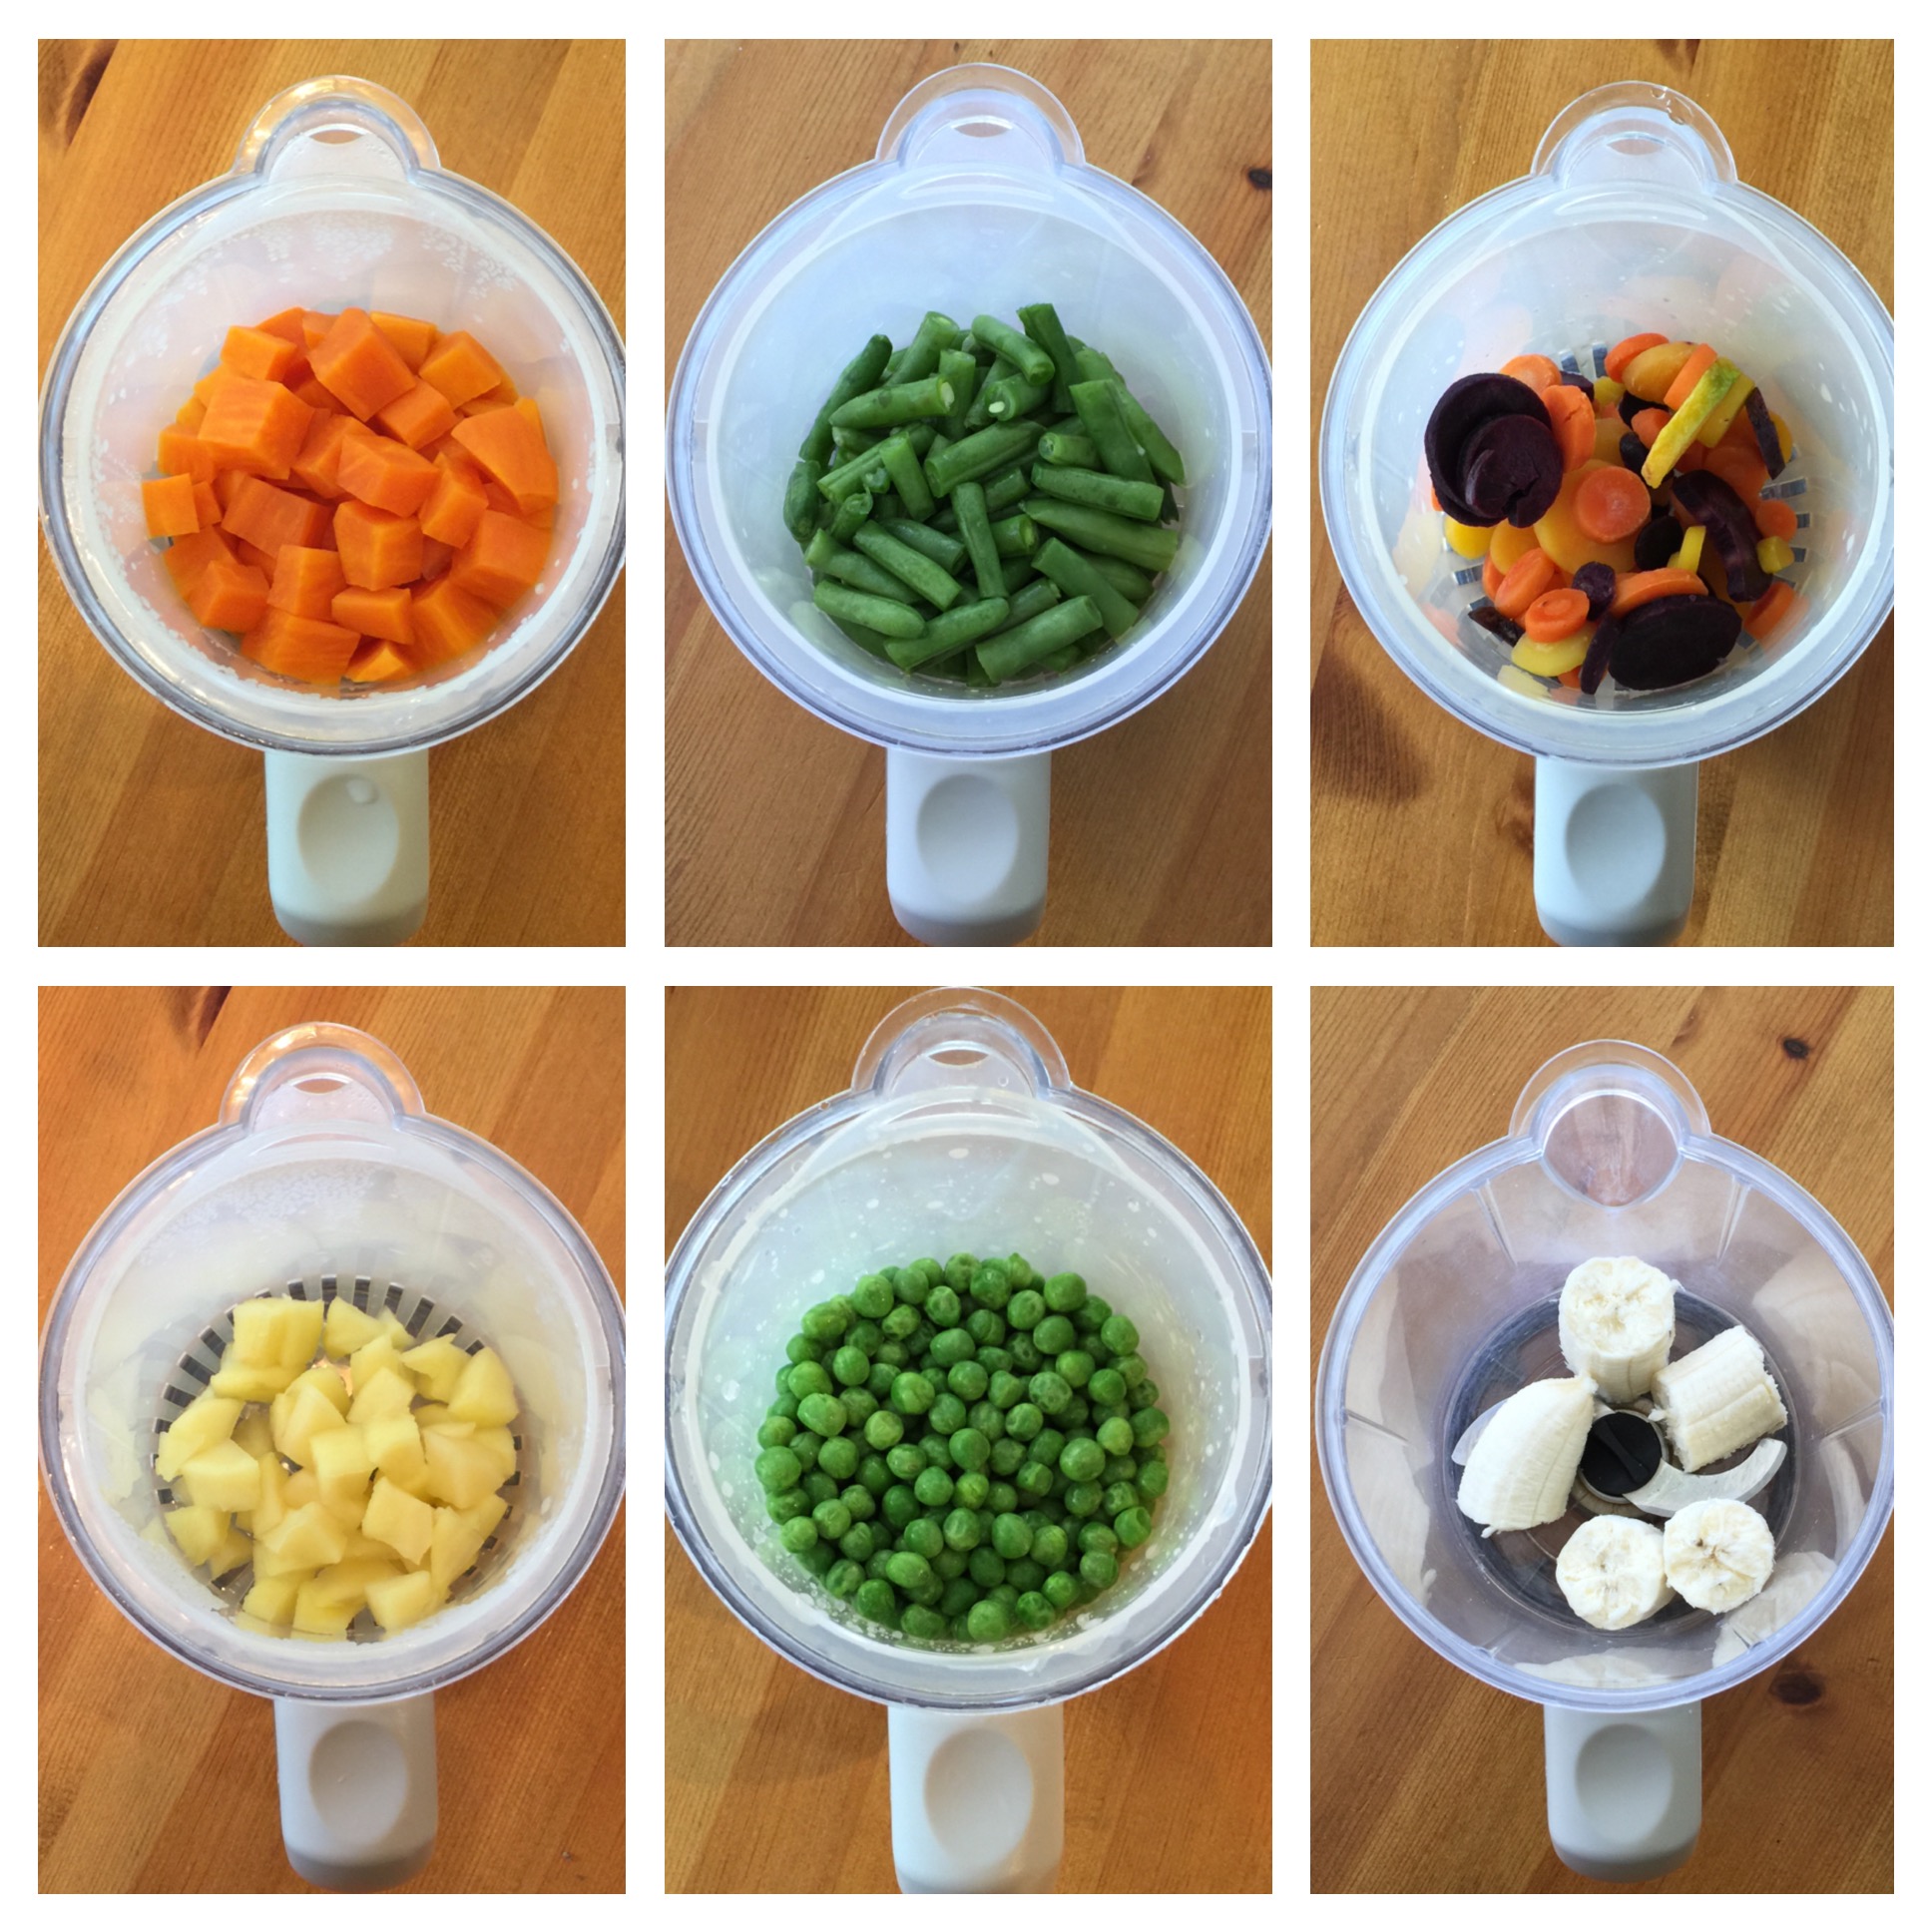 best first baby foods